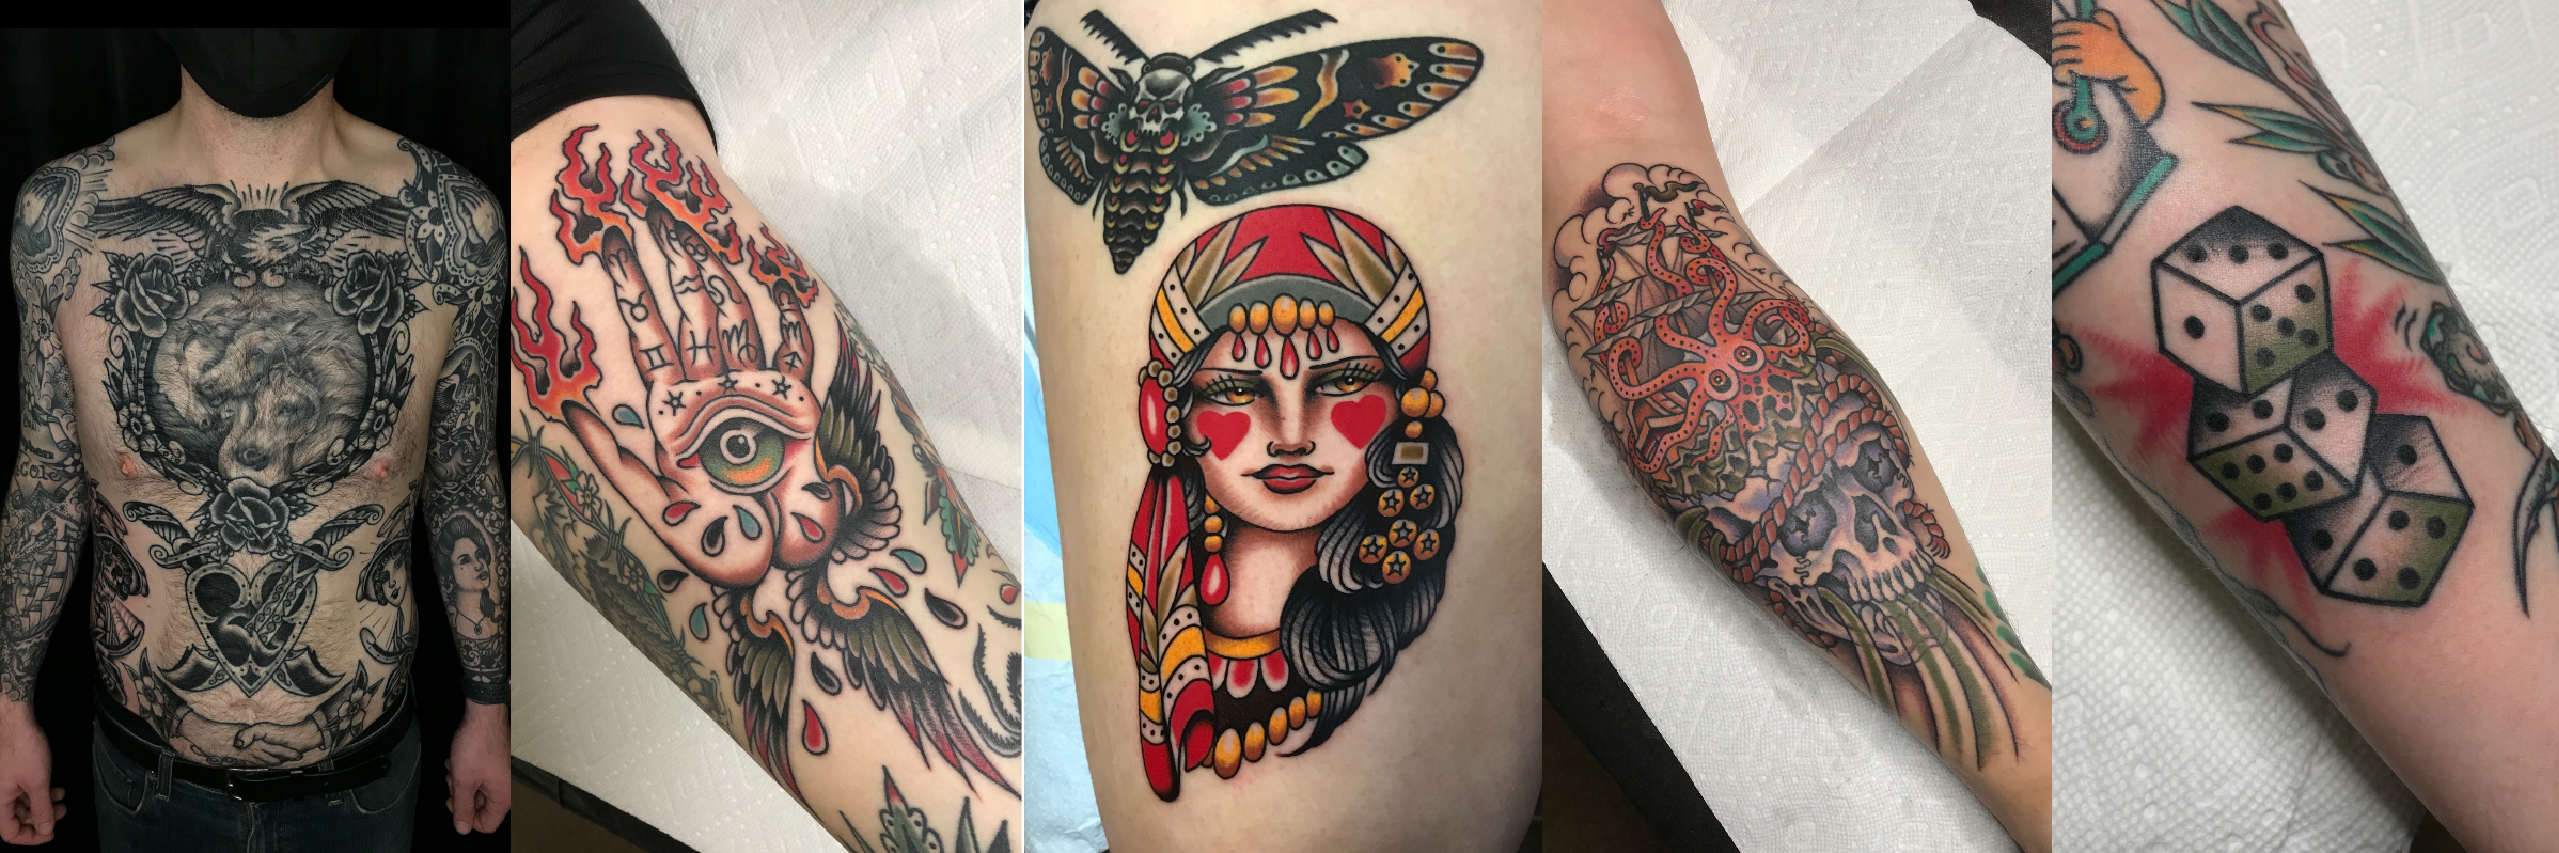 A few from our recent guest wolfhazel Thanks for dropping in on us    tattoo tattoos tattooartist tattooshop traditionaltattoo  Instagram  post from MAGIC COBRA TATTOO SOCIETY magiccobratattoo